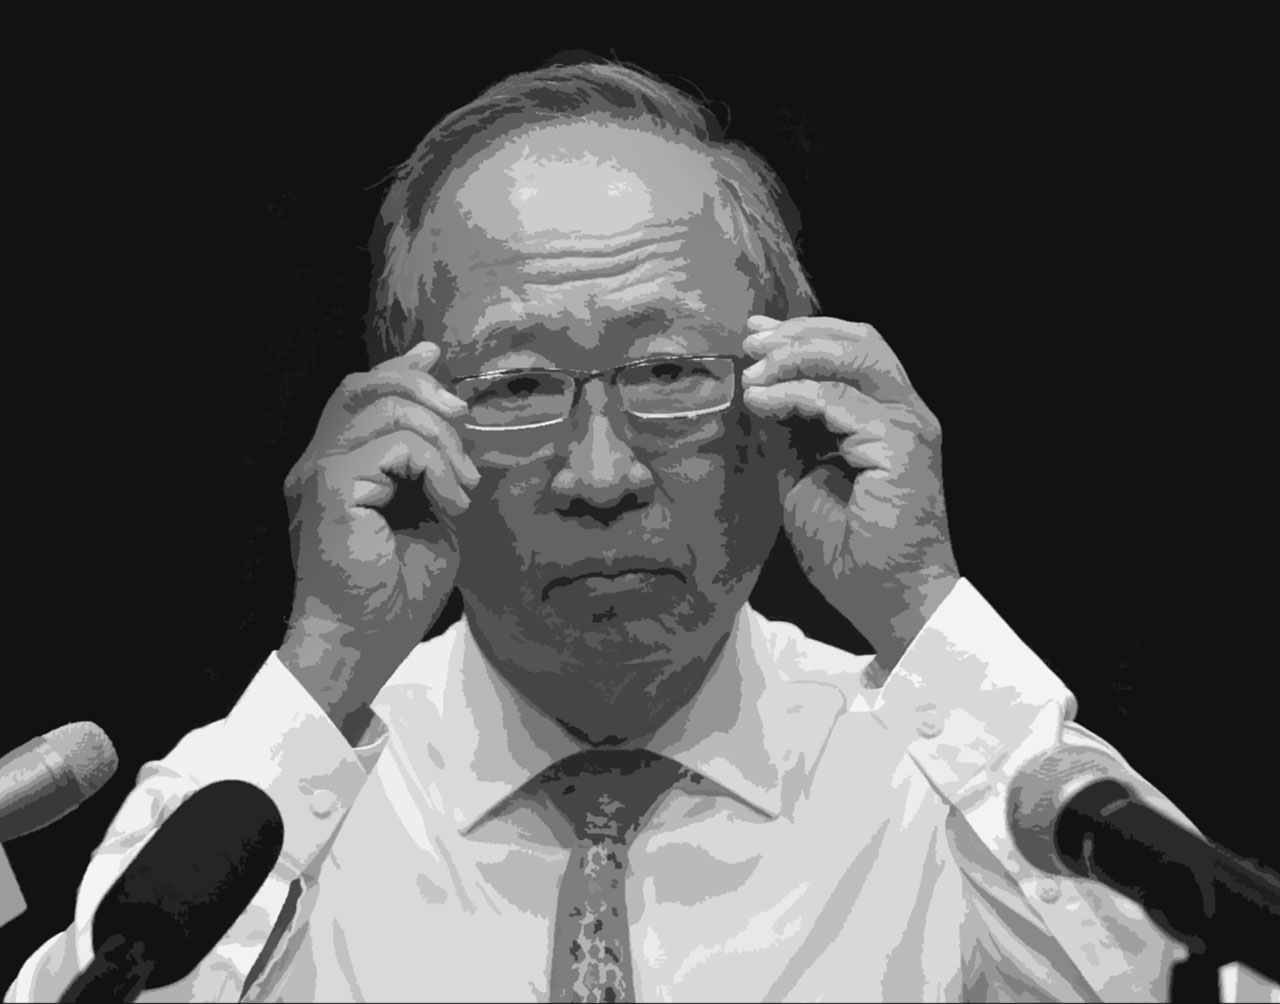 The Ghost of Tan Cheng Bock